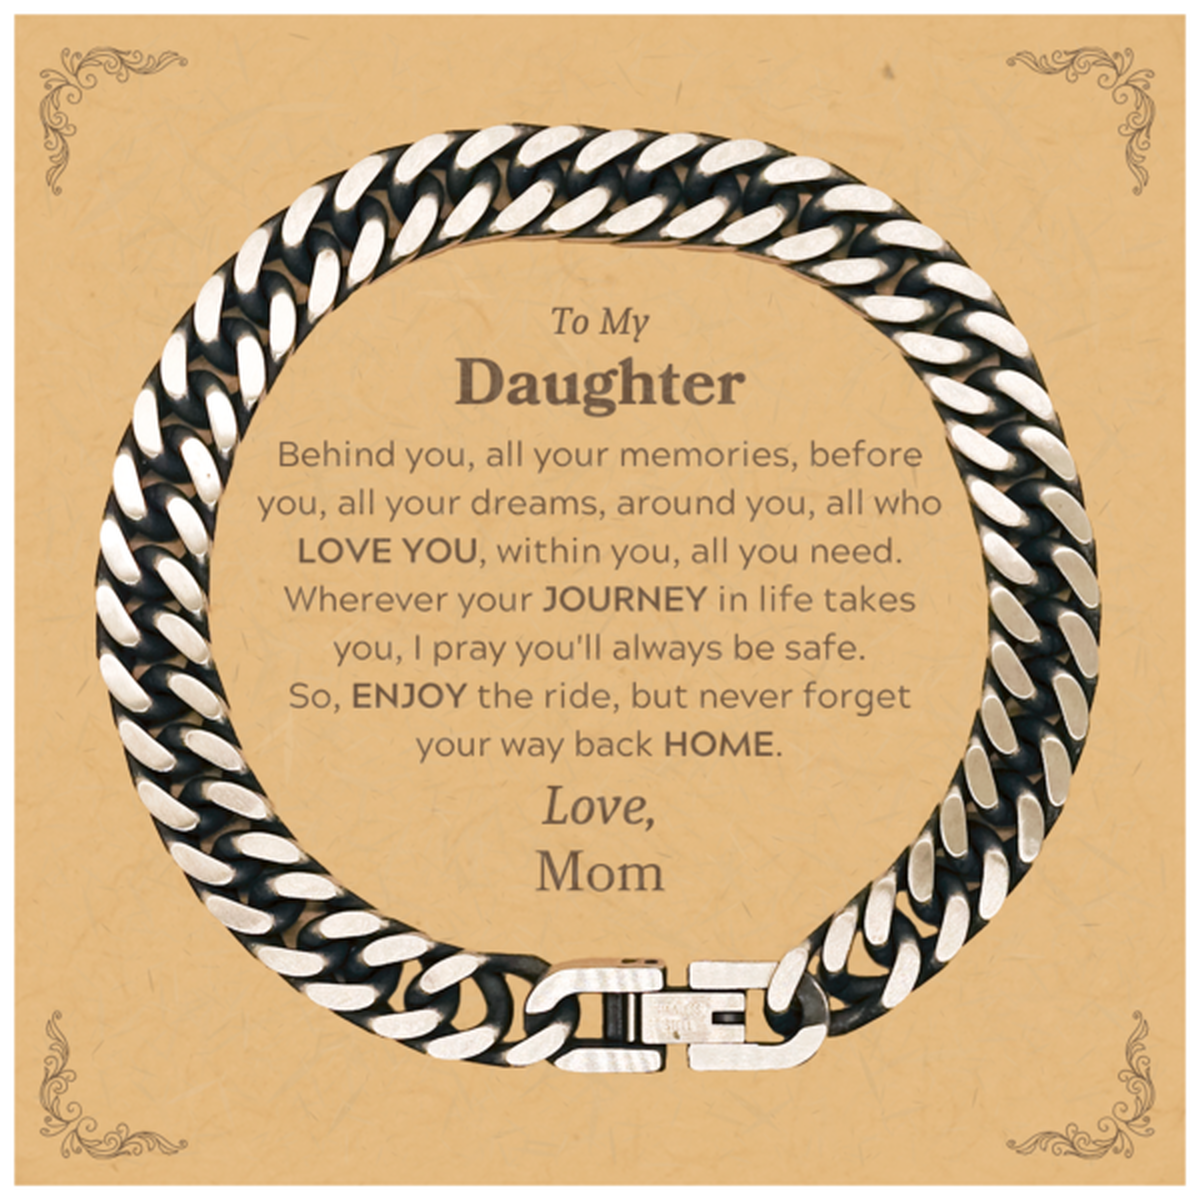 To My Daughter Graduation Gifts from Mom, Daughter Cuban Link Chain Bracelet Christmas Birthday Gifts for Daughter Behind you, all your memories, before you, all your dreams. Love, Mom